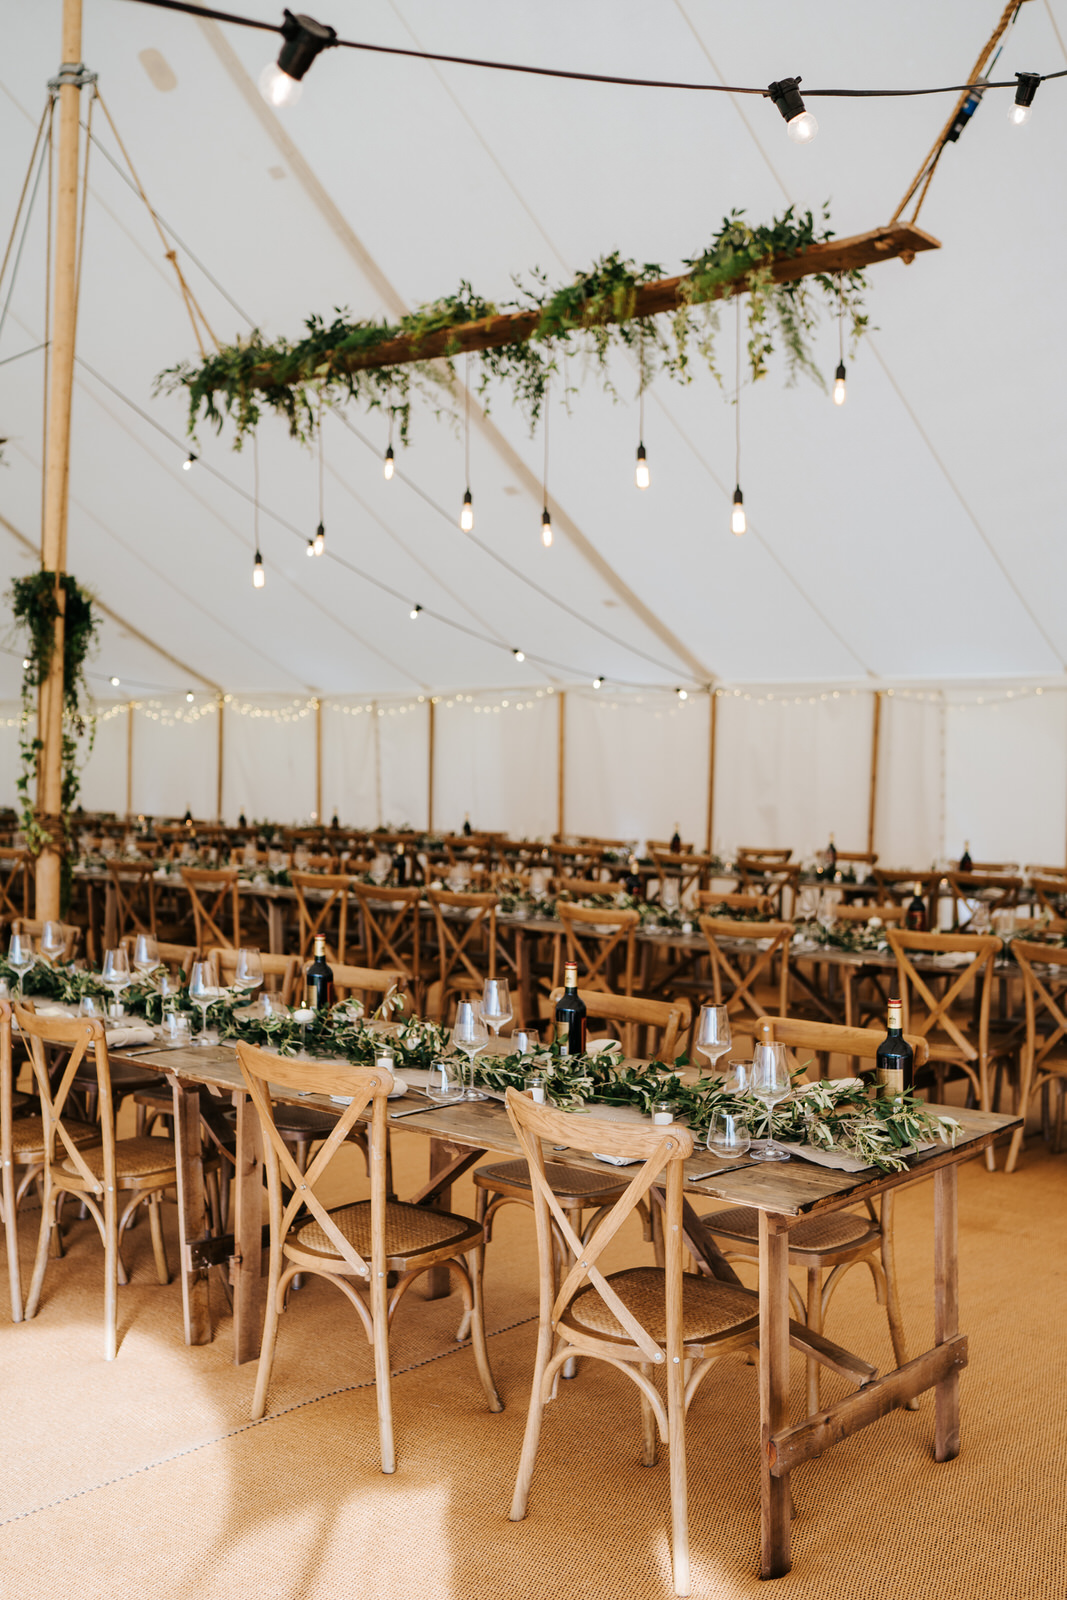  Rustic and charming table setup and decoration inside marquee in the garden of Hawarden Castle 